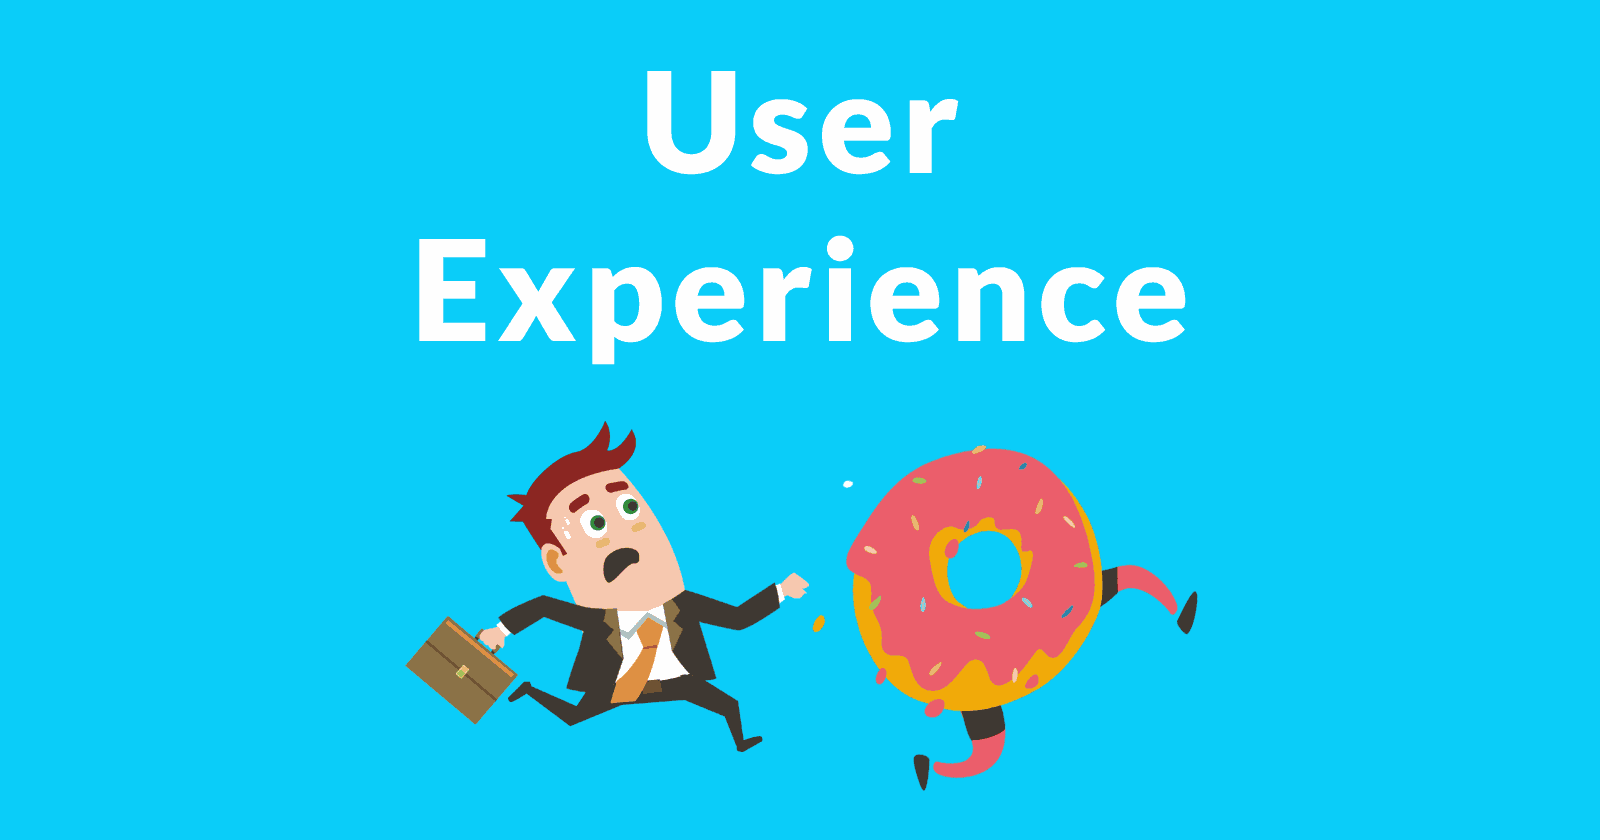 user-experience-marketing-5df15786c6d4f.png